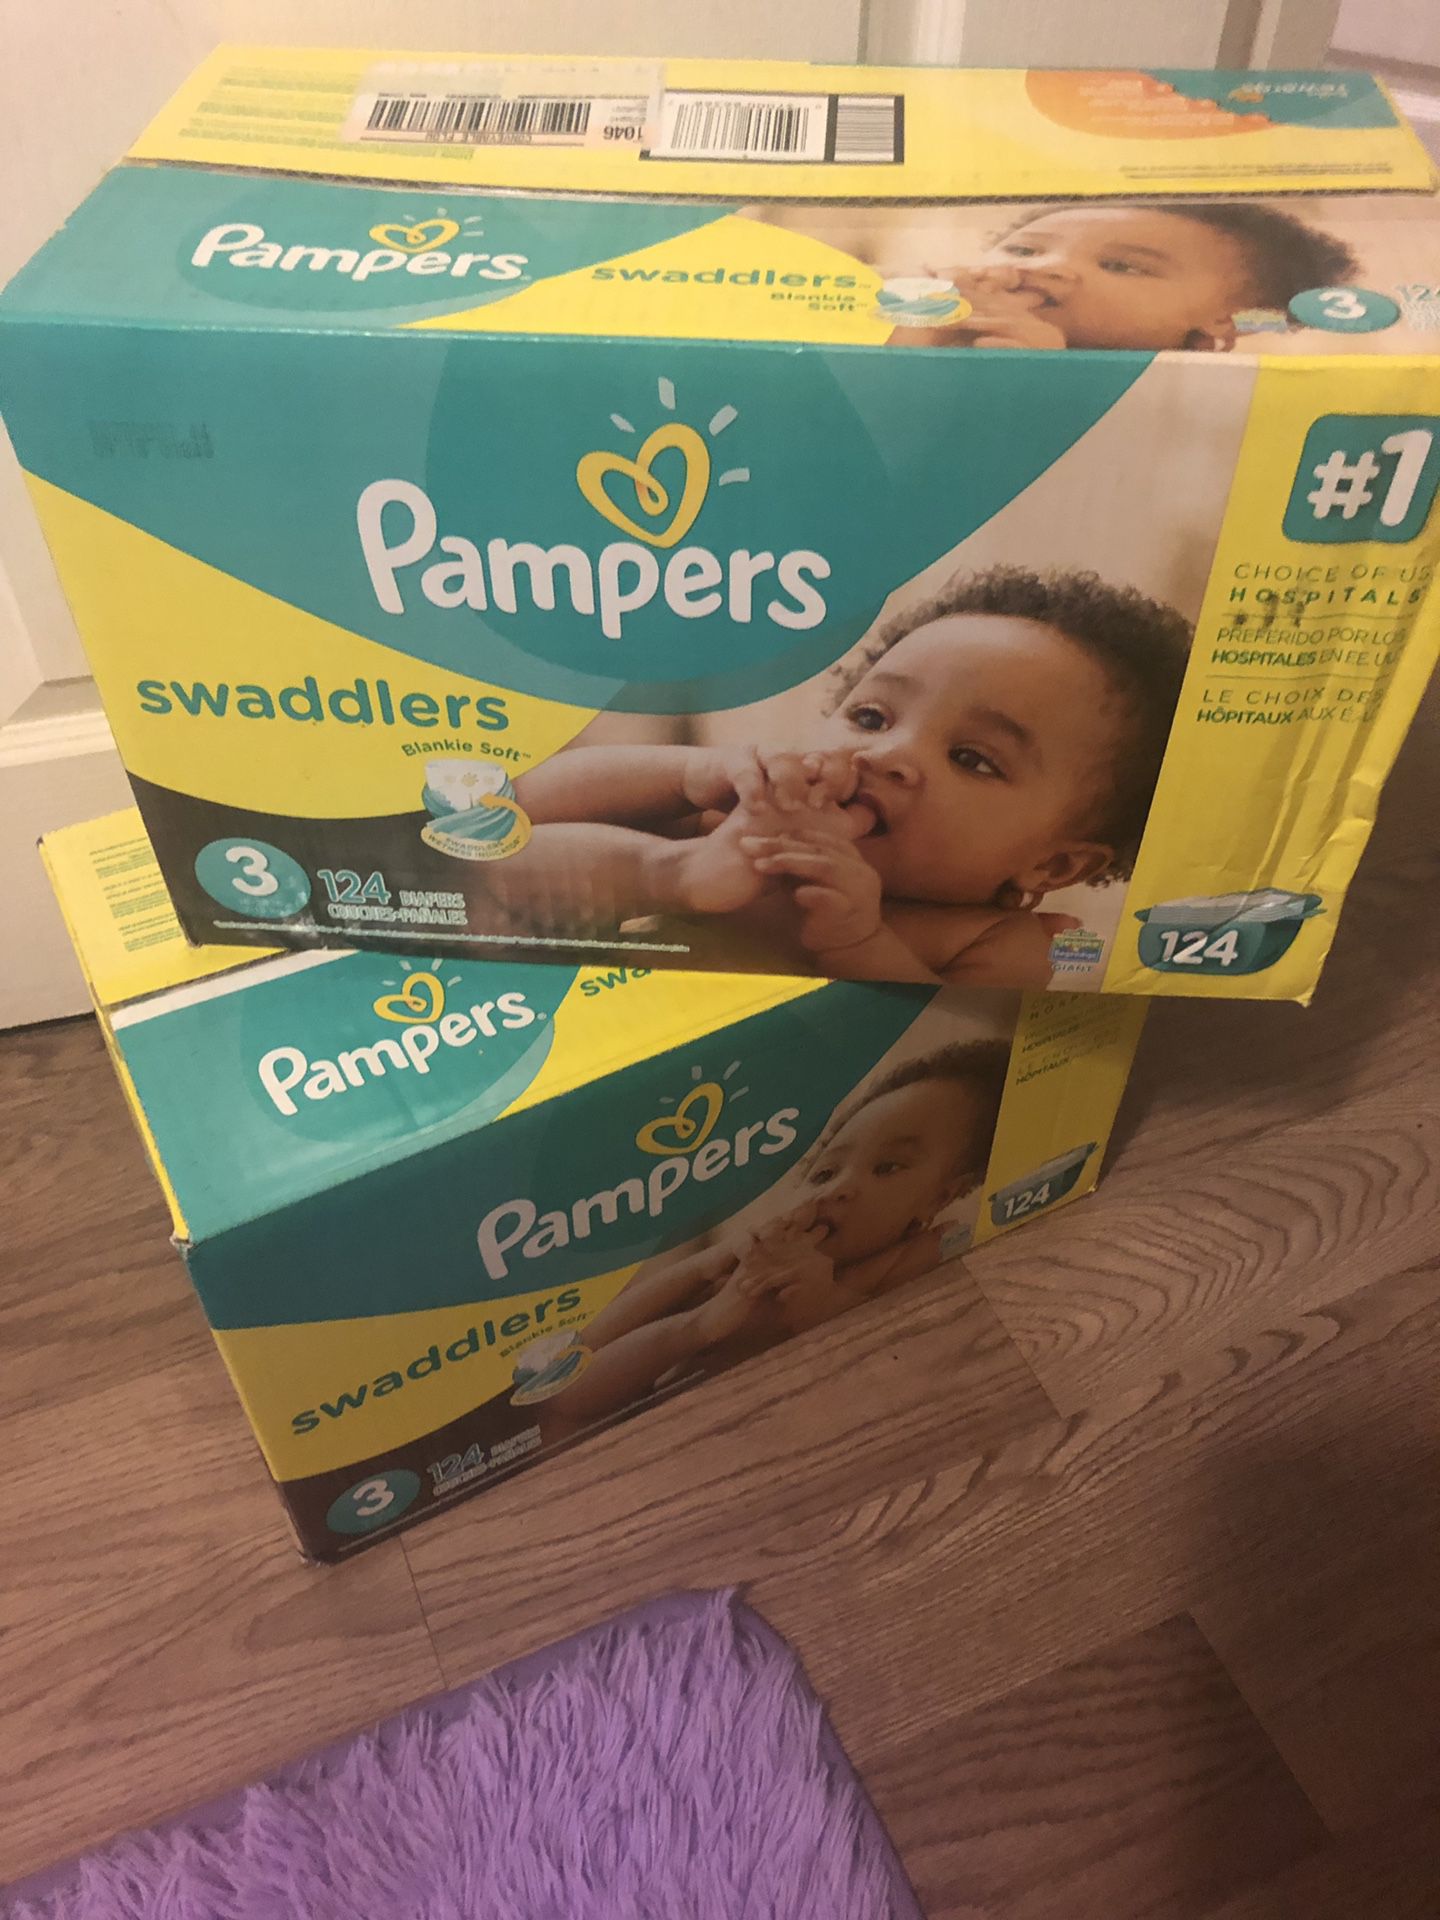 Pampers Swaddlers Size 3